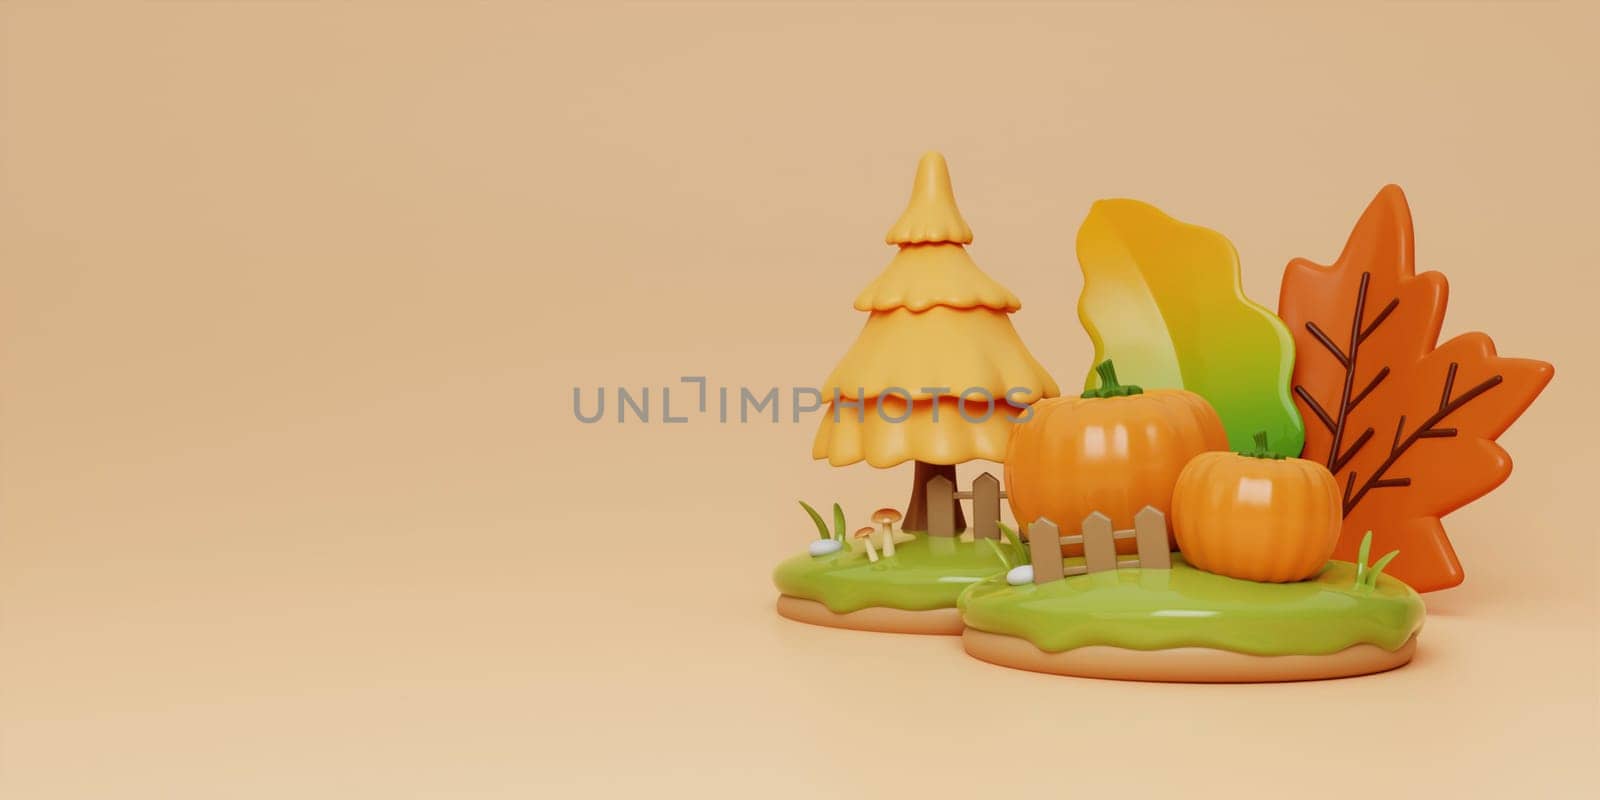 Autumn Display Background with pine tree, Autumn leaves and empty minimal podium pedestal product display. 3d render illustration..